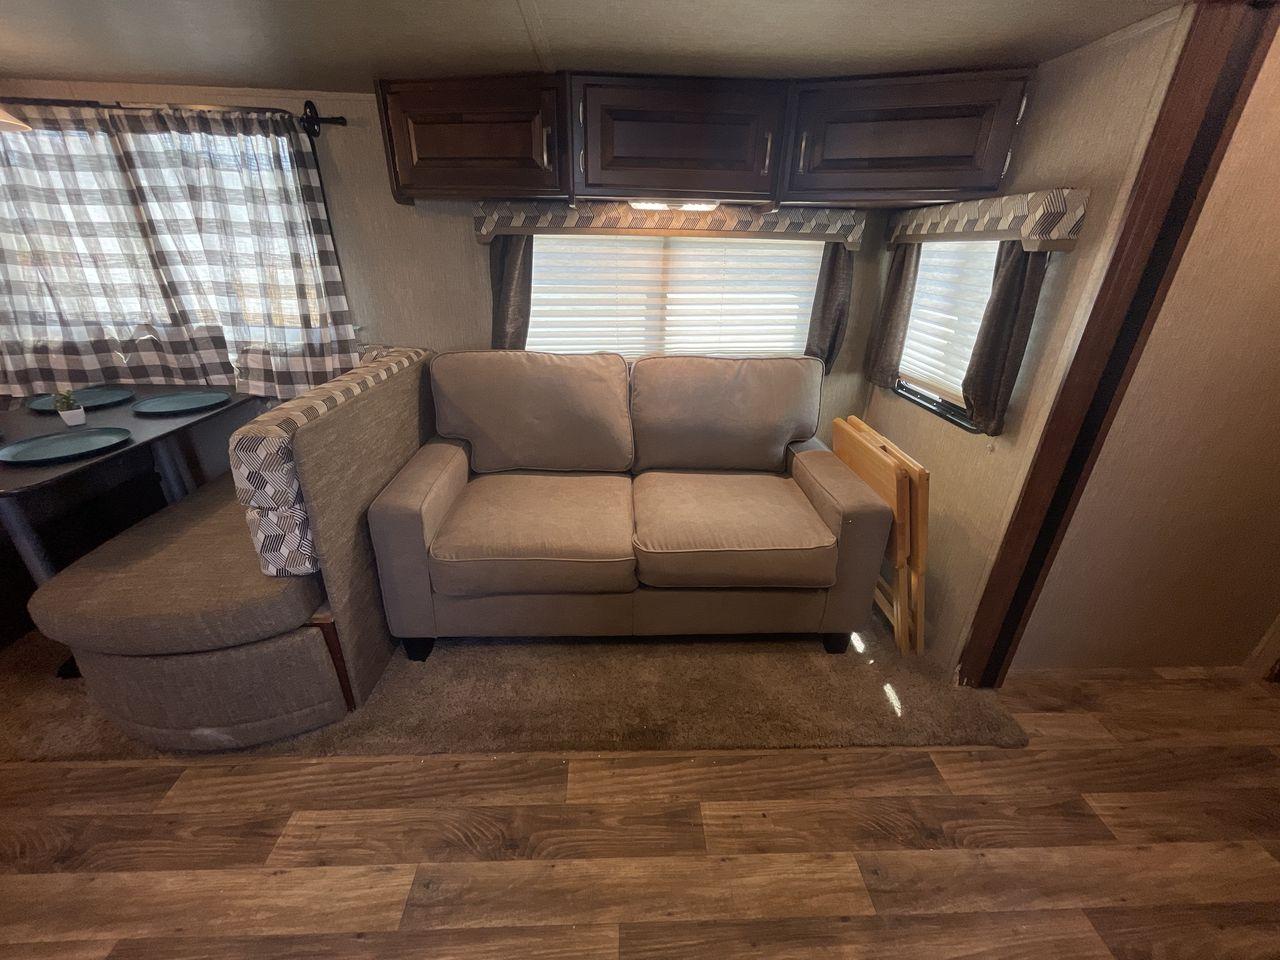 2018 BLACK KEYSTONE RV OUTBACK 325BH (4YDT32520JB) , Length: 37.42 ft. | Dry Weight: 8,428 lbs. | Gross Weight: 10,500 lbs. | Slides: 3 transmission, located at 4319 N Main St, Cleburne, TX, 76033, (817) 678-5133, 32.385960, -97.391212 - Photo #14